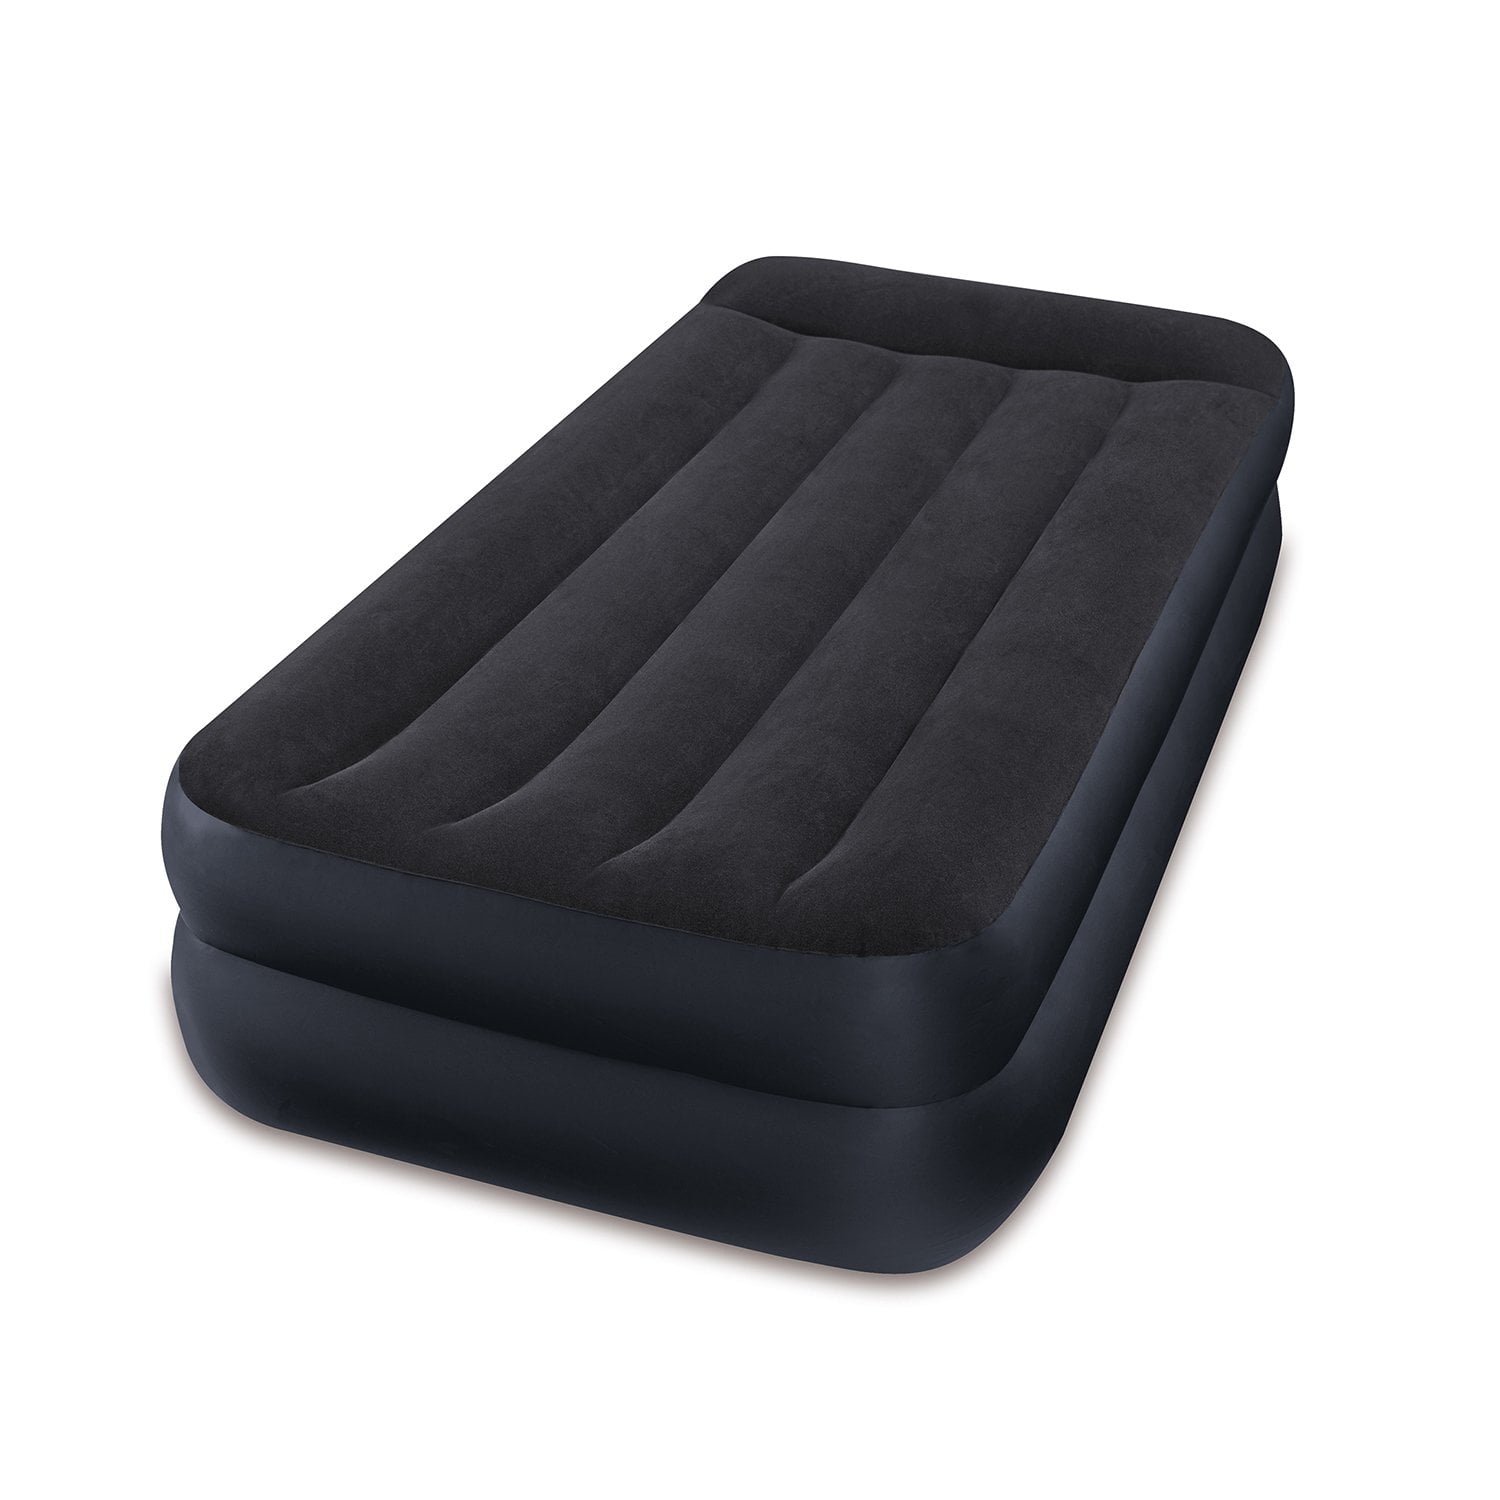 Intex Classic Inflatable Full Airbed With Built In Pillow Rest 2 Pack Pump 